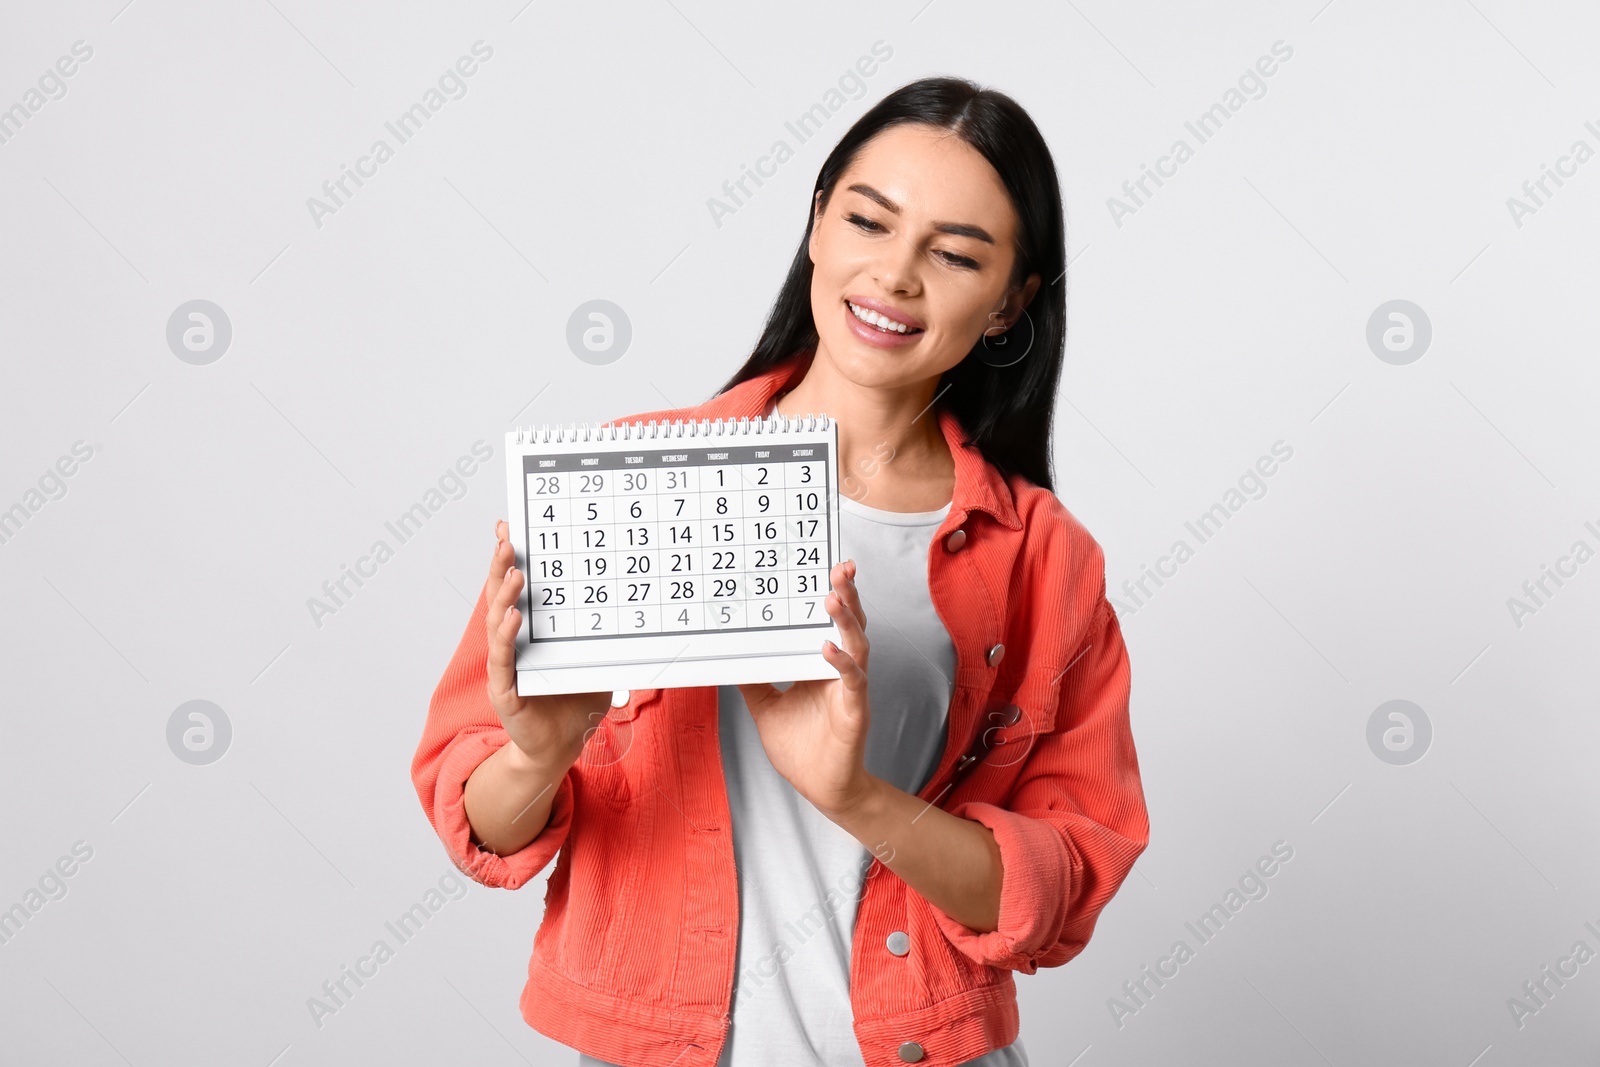 Photo of Young woman holding calendar with marked menstrual cycle days on light background